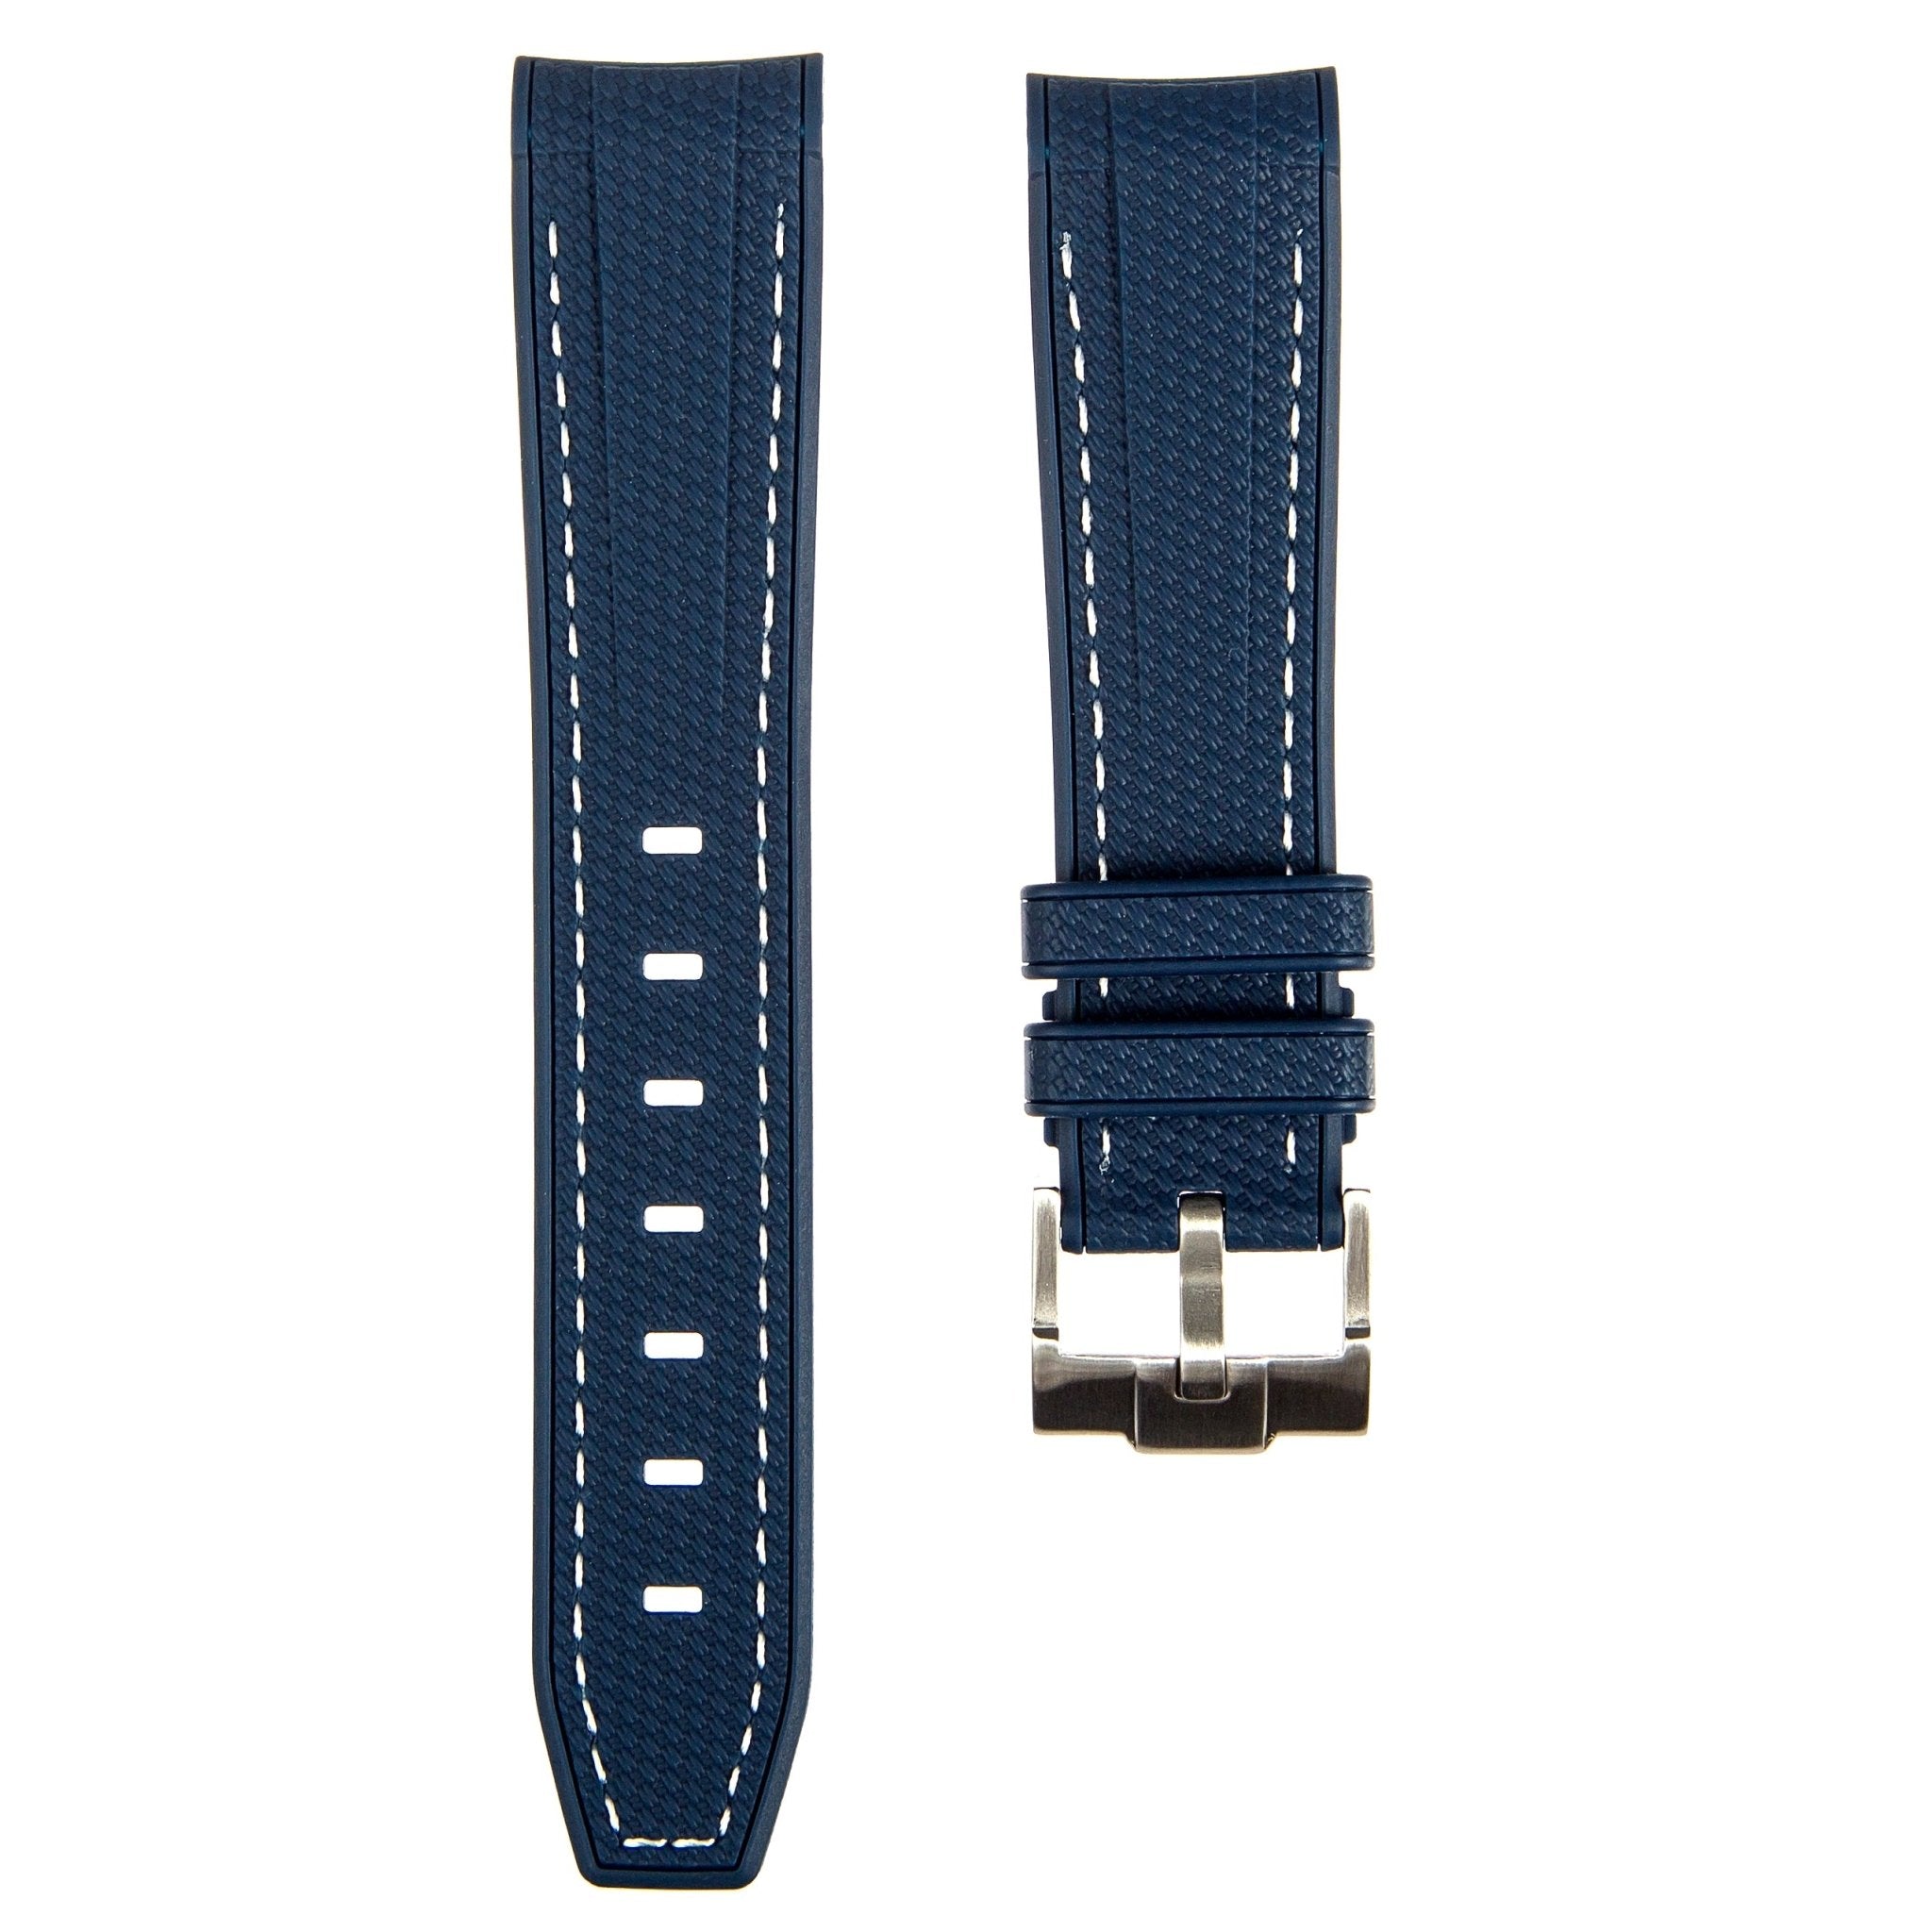 Textured Curved End Premium Silicone Strap - Compatible with Omega Moonwatch - Navy with White Stitch (2405) -StrapSeeker